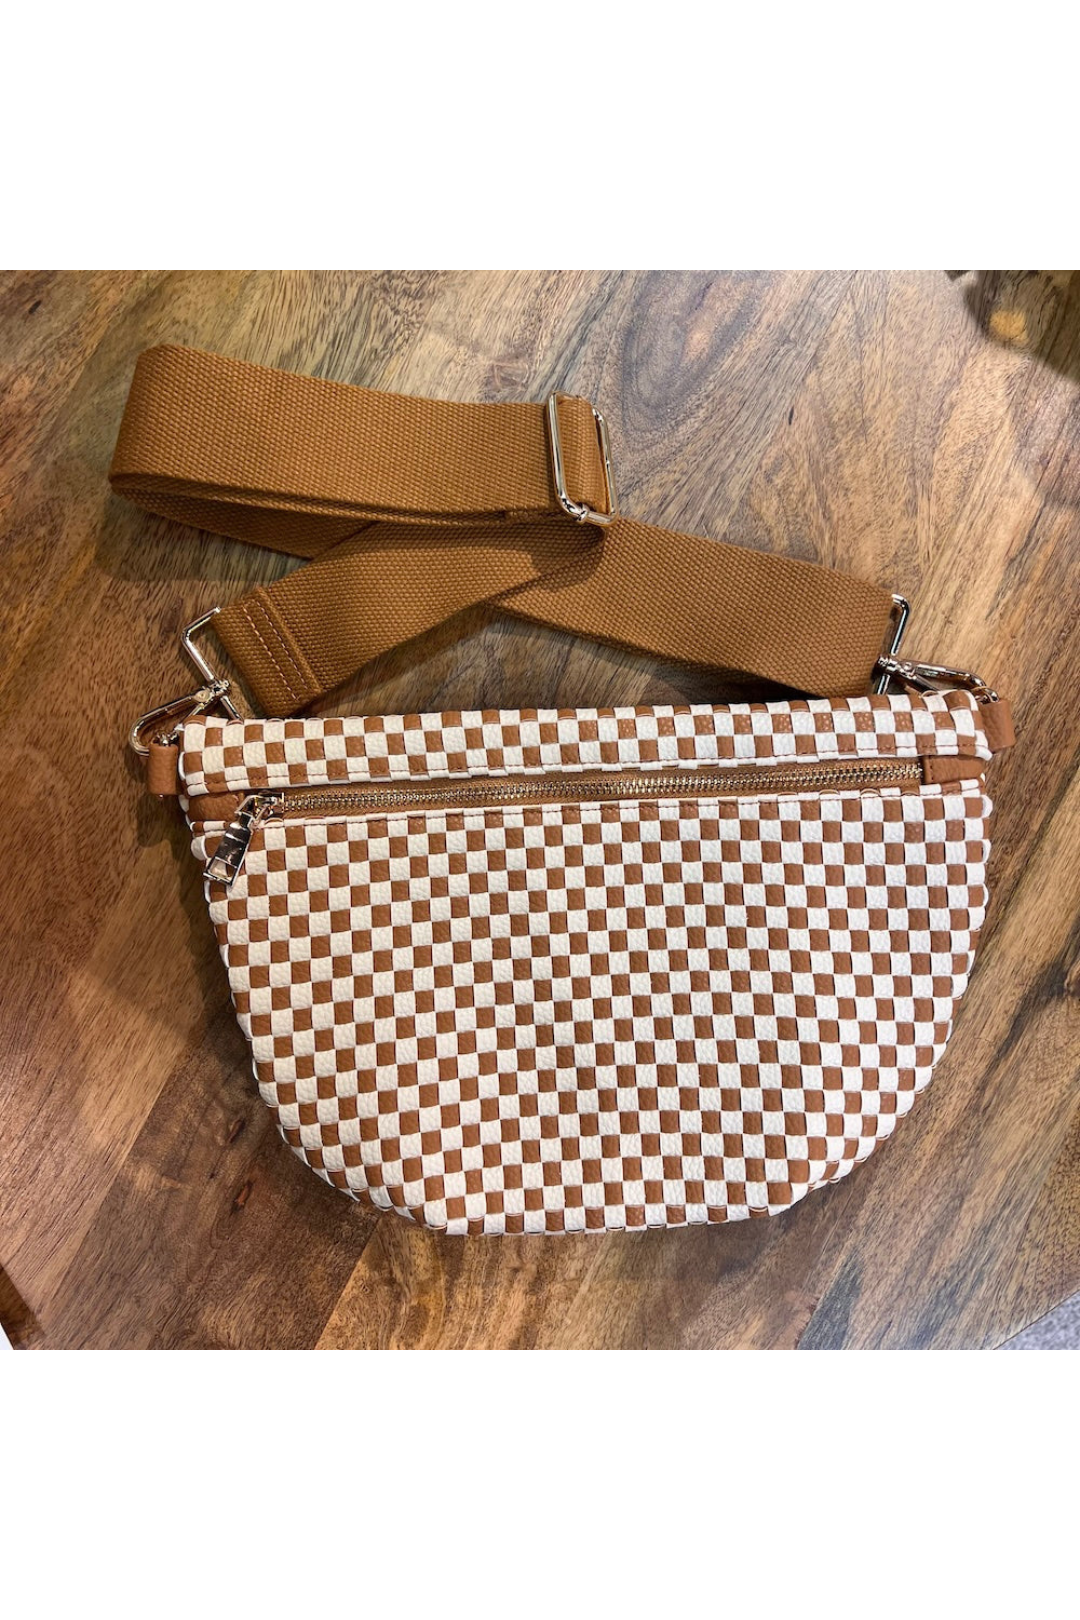 Westlyn Woven Bum Bag - Checkered Brown